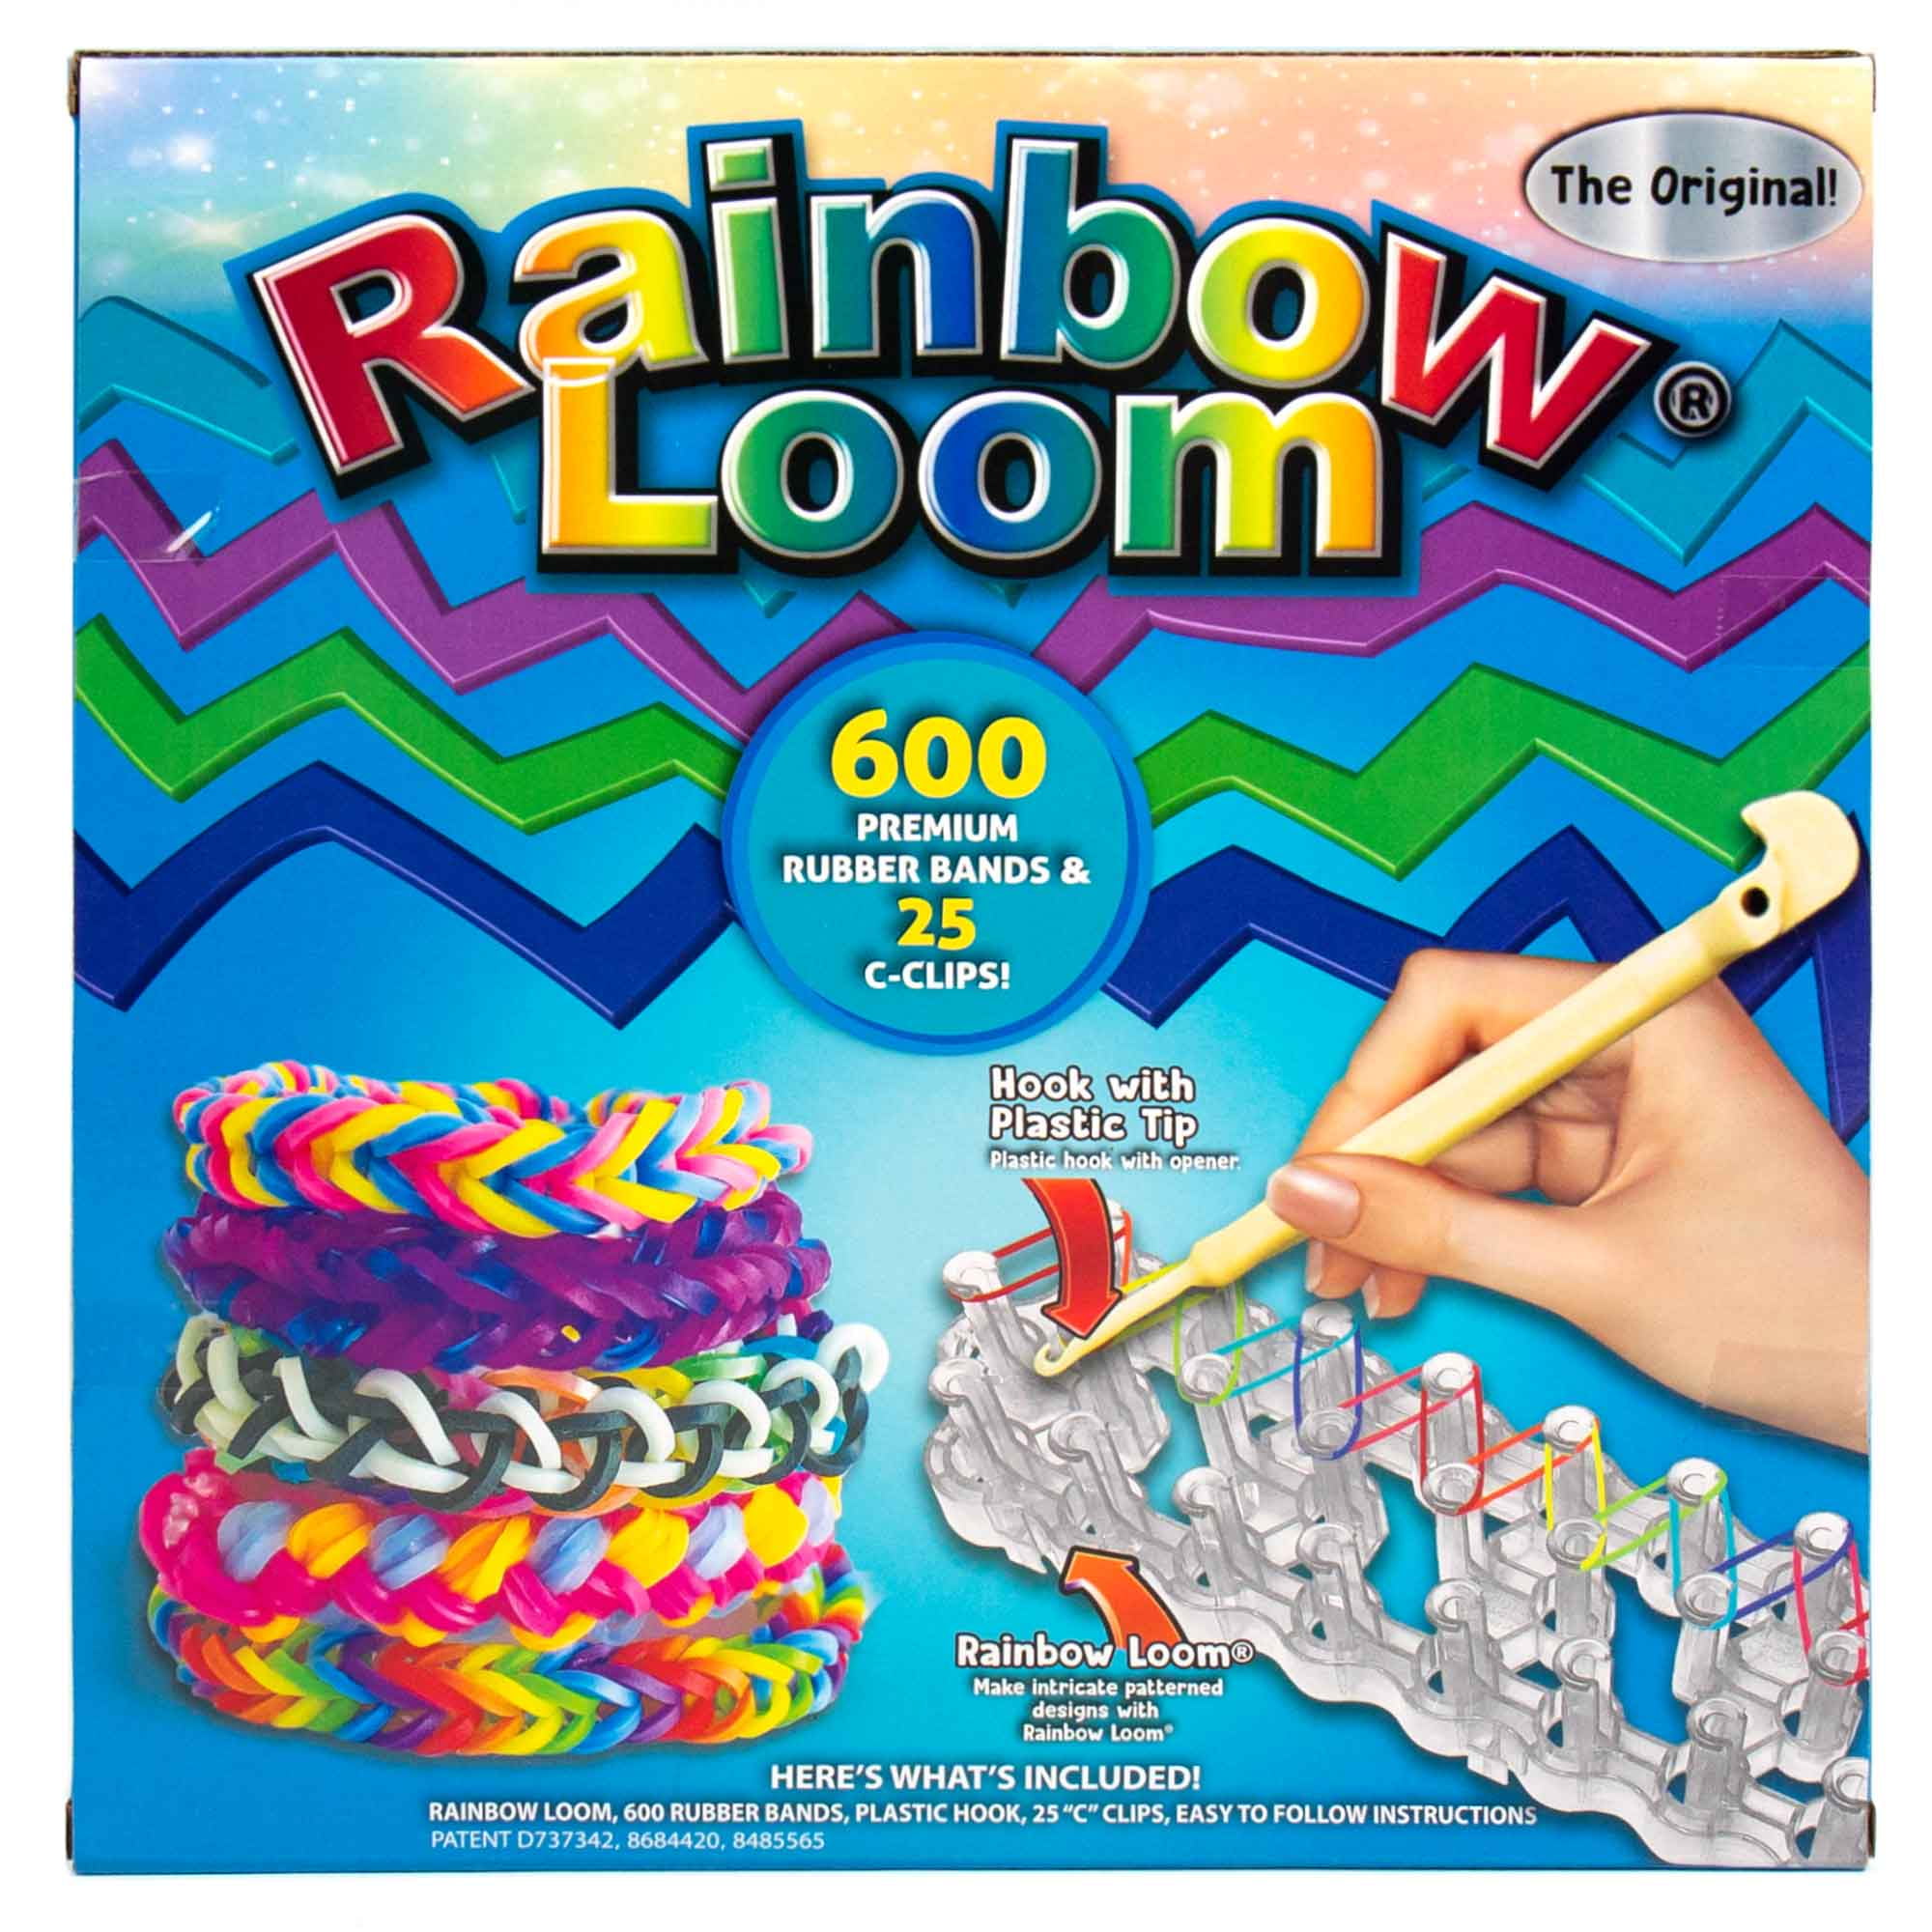 Amazon.com: Rainbow Loom® Treasure Box NEON Edition, 8,000 Rubber Bands in  8 Different Neon Colors, and a Bonus of 2 Happy Looms, Great Activities for  Boys and Girls 7+ : Toys & Games